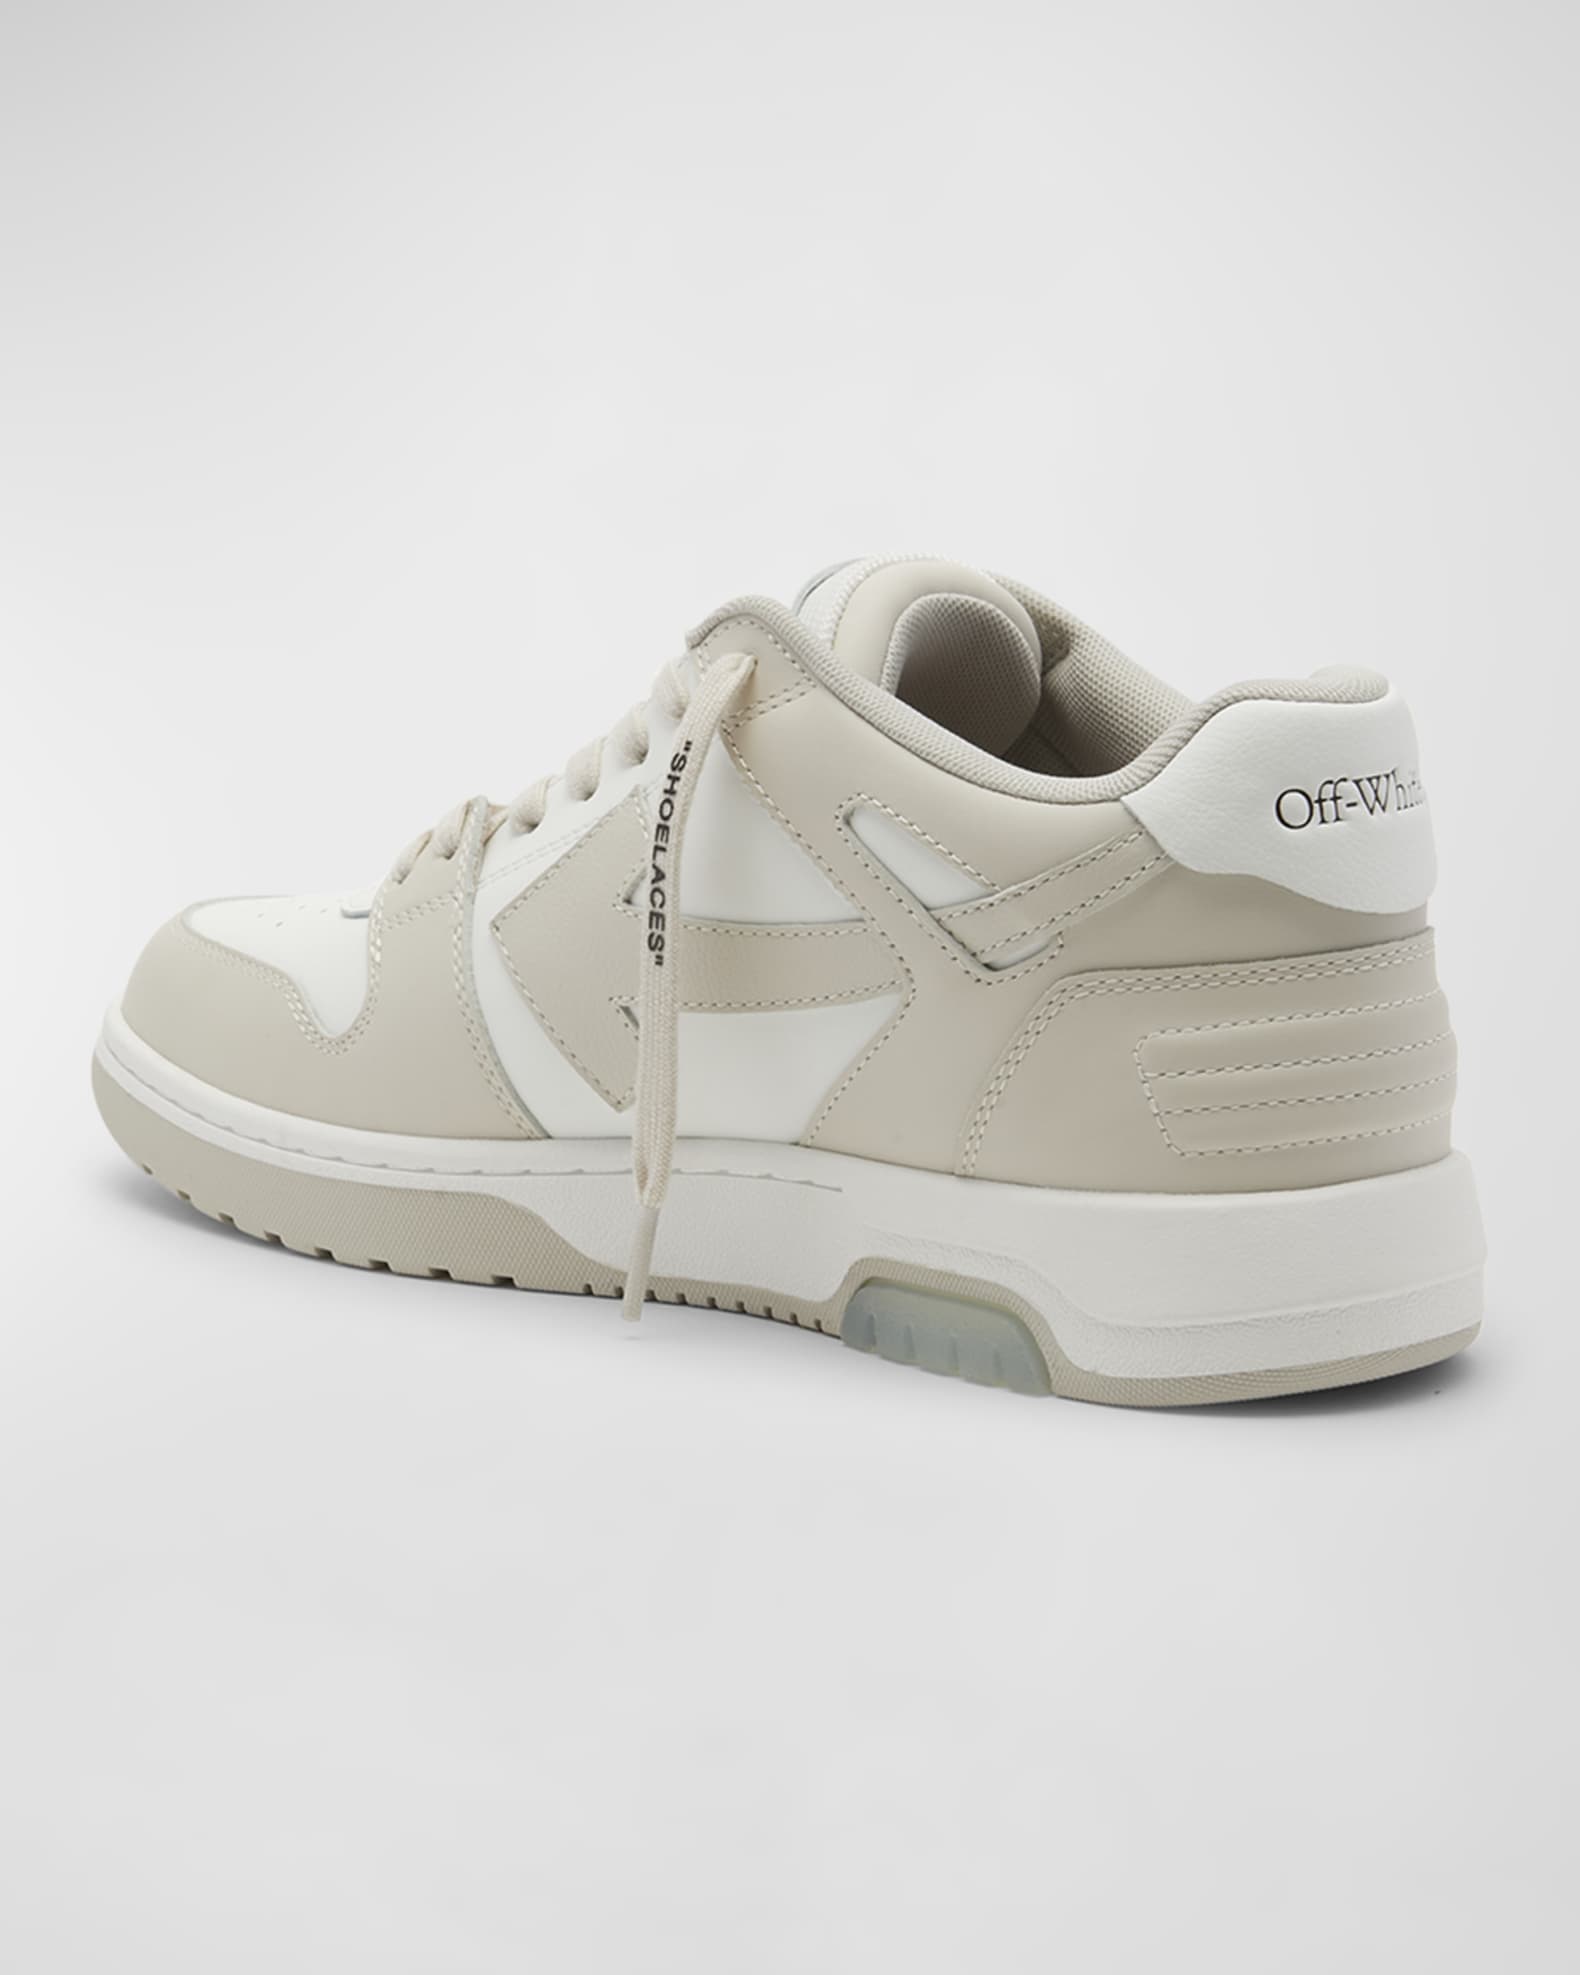 Off-White Out Of Office Arrow Bicolor Sneakers | Neiman Marcus